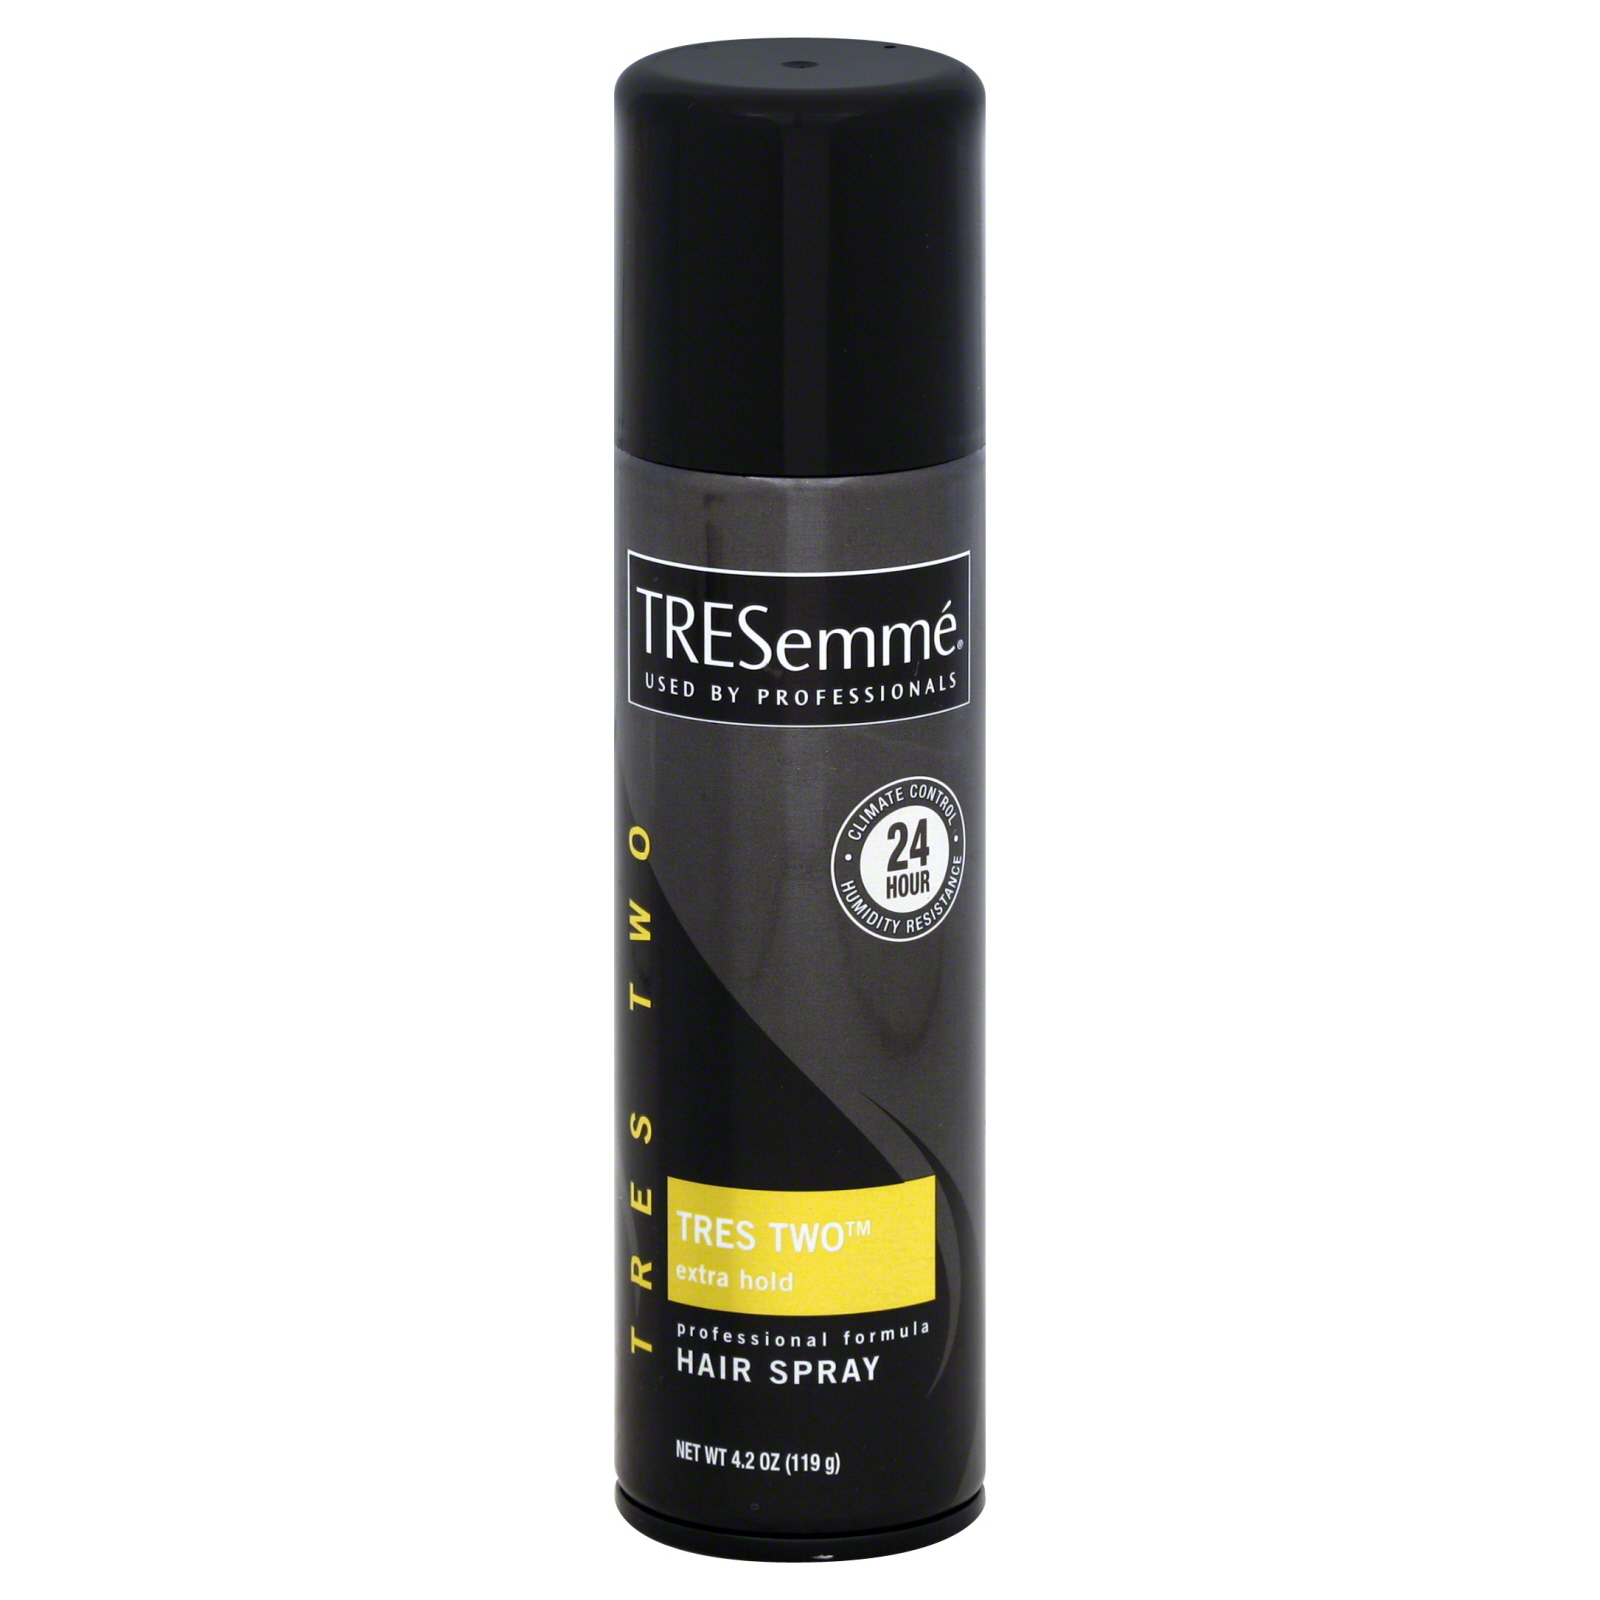 TRESemme TRES Two Hair Spray, Extra Hold, 4.2 oz (119 g)